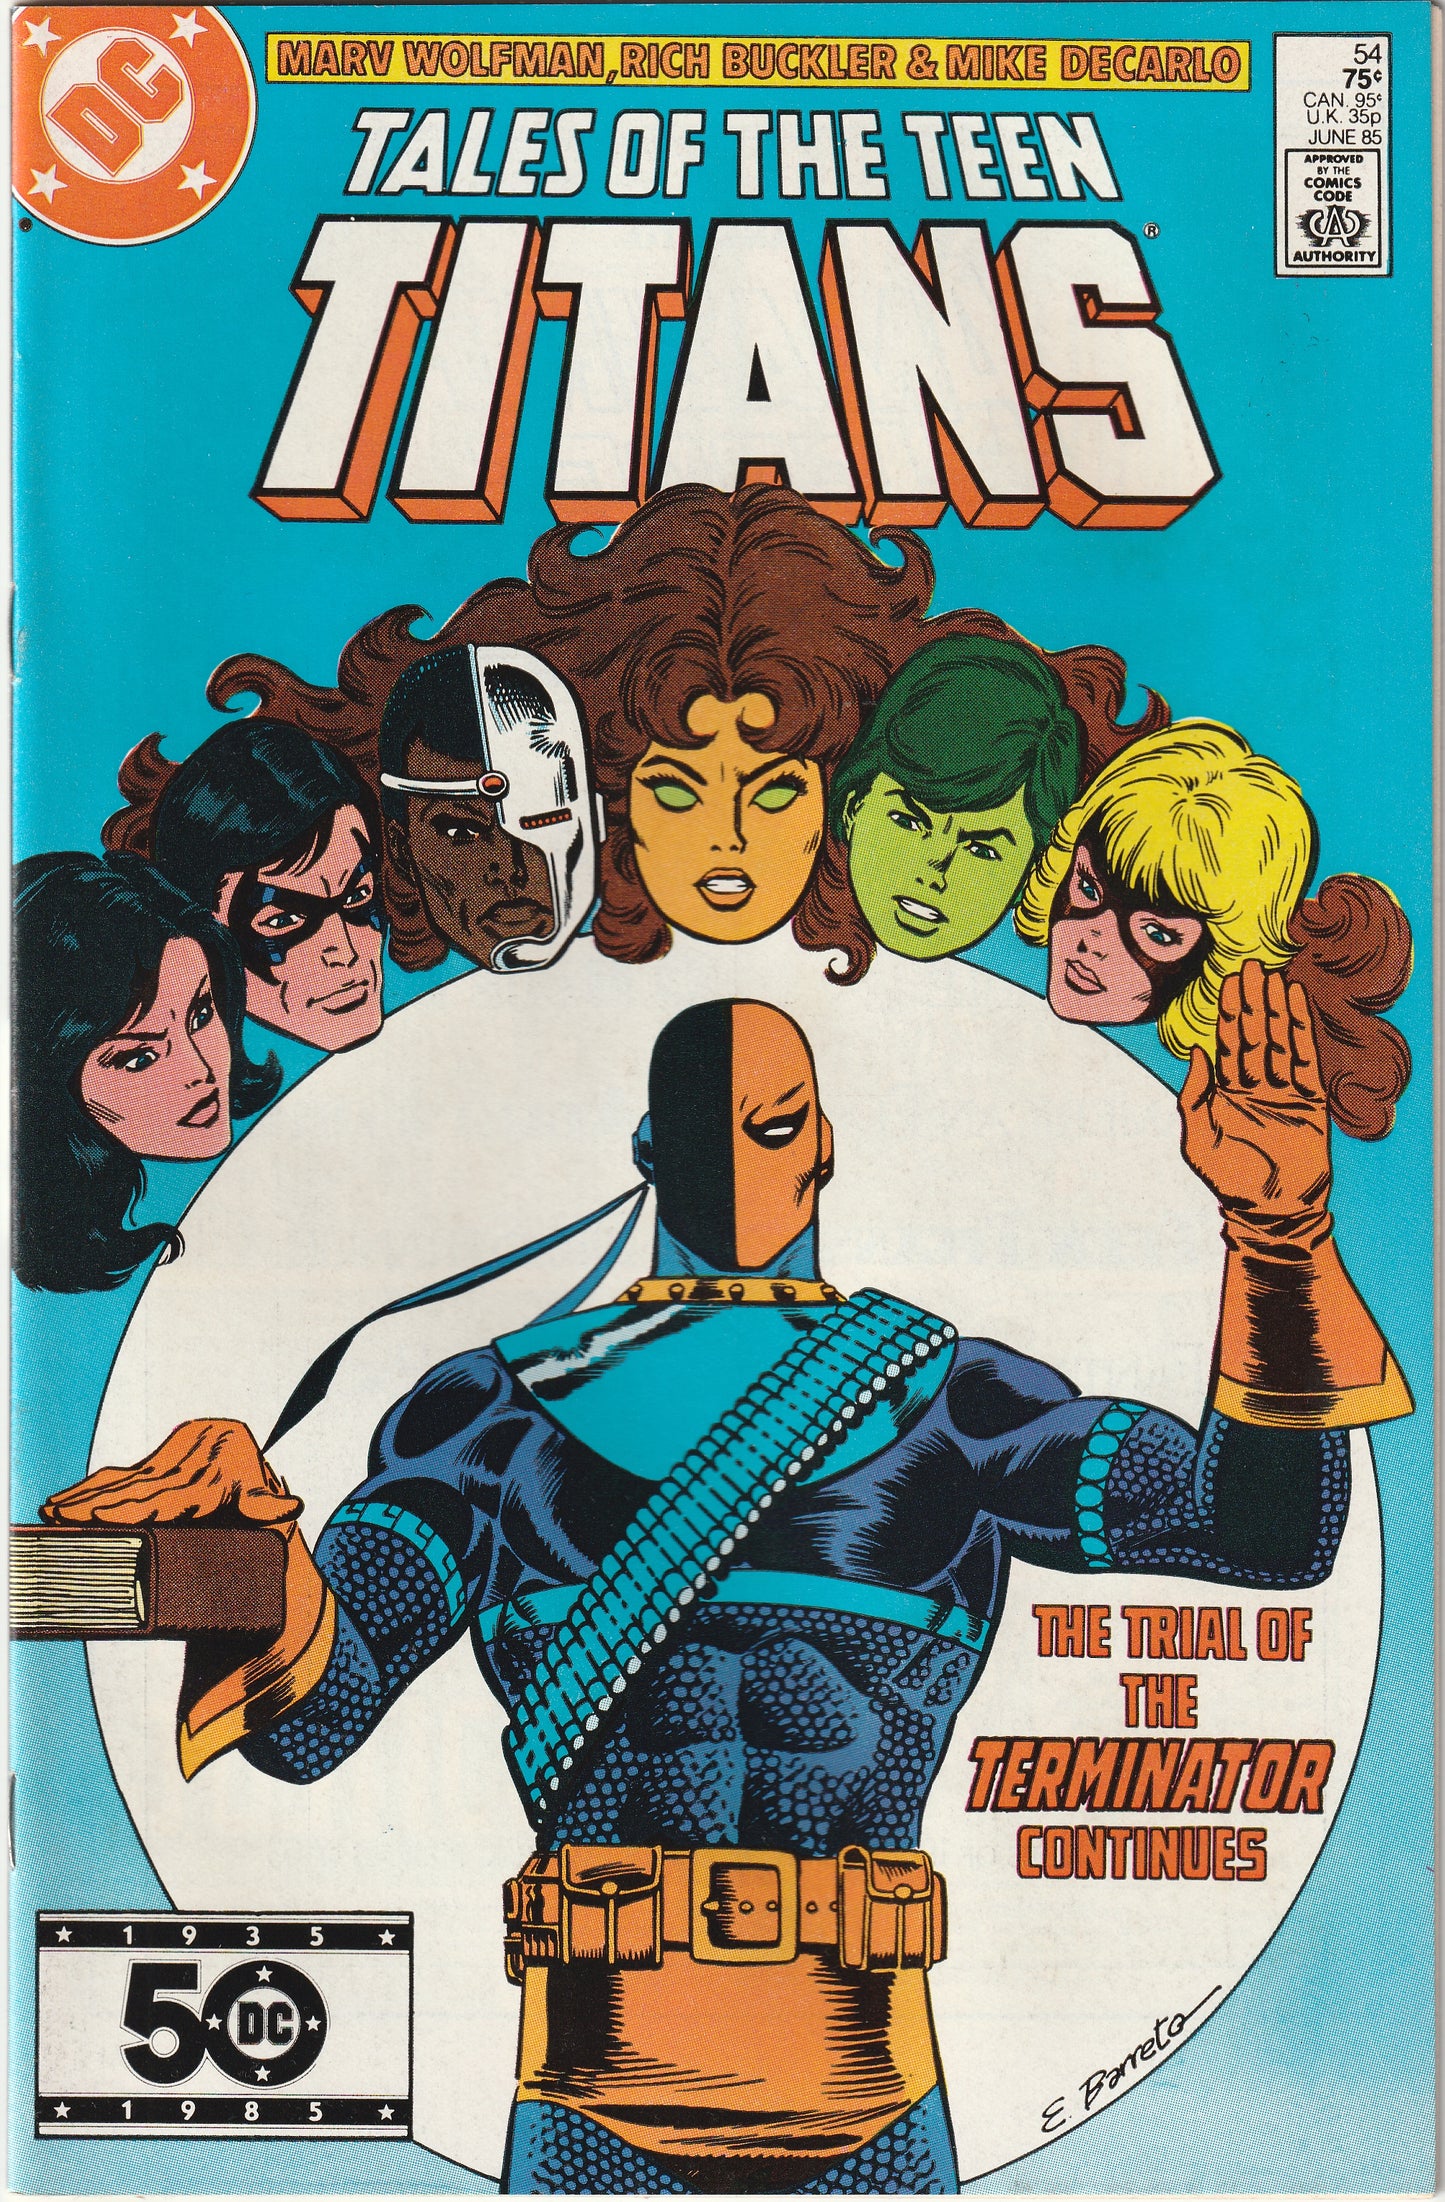 Tales of the Teen Titans #54 (1985)